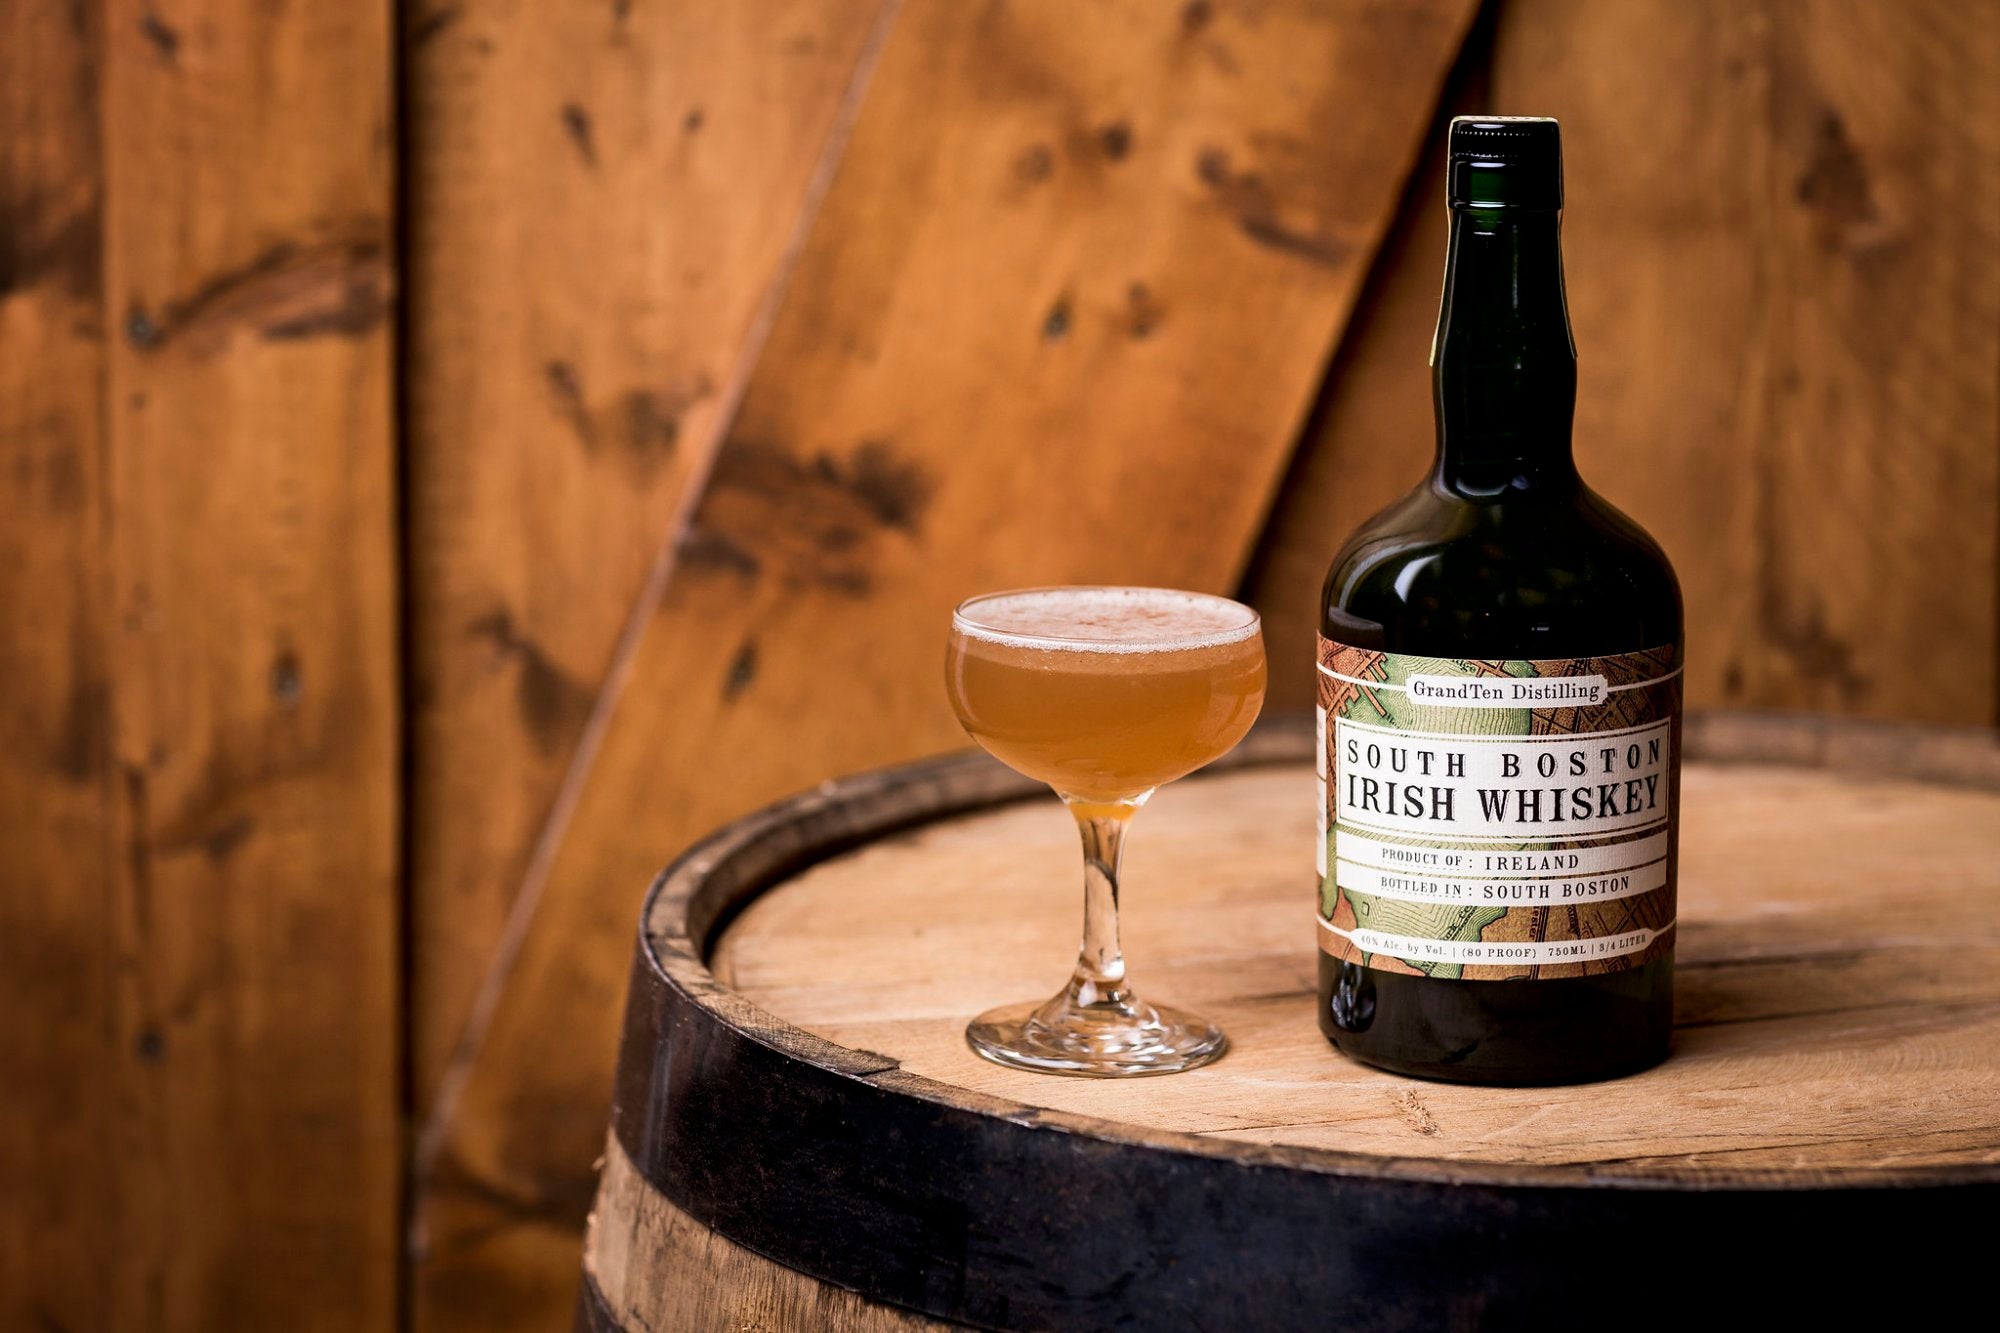 GrandTen Distilling South Boston Irish Whiskey and a cocktail